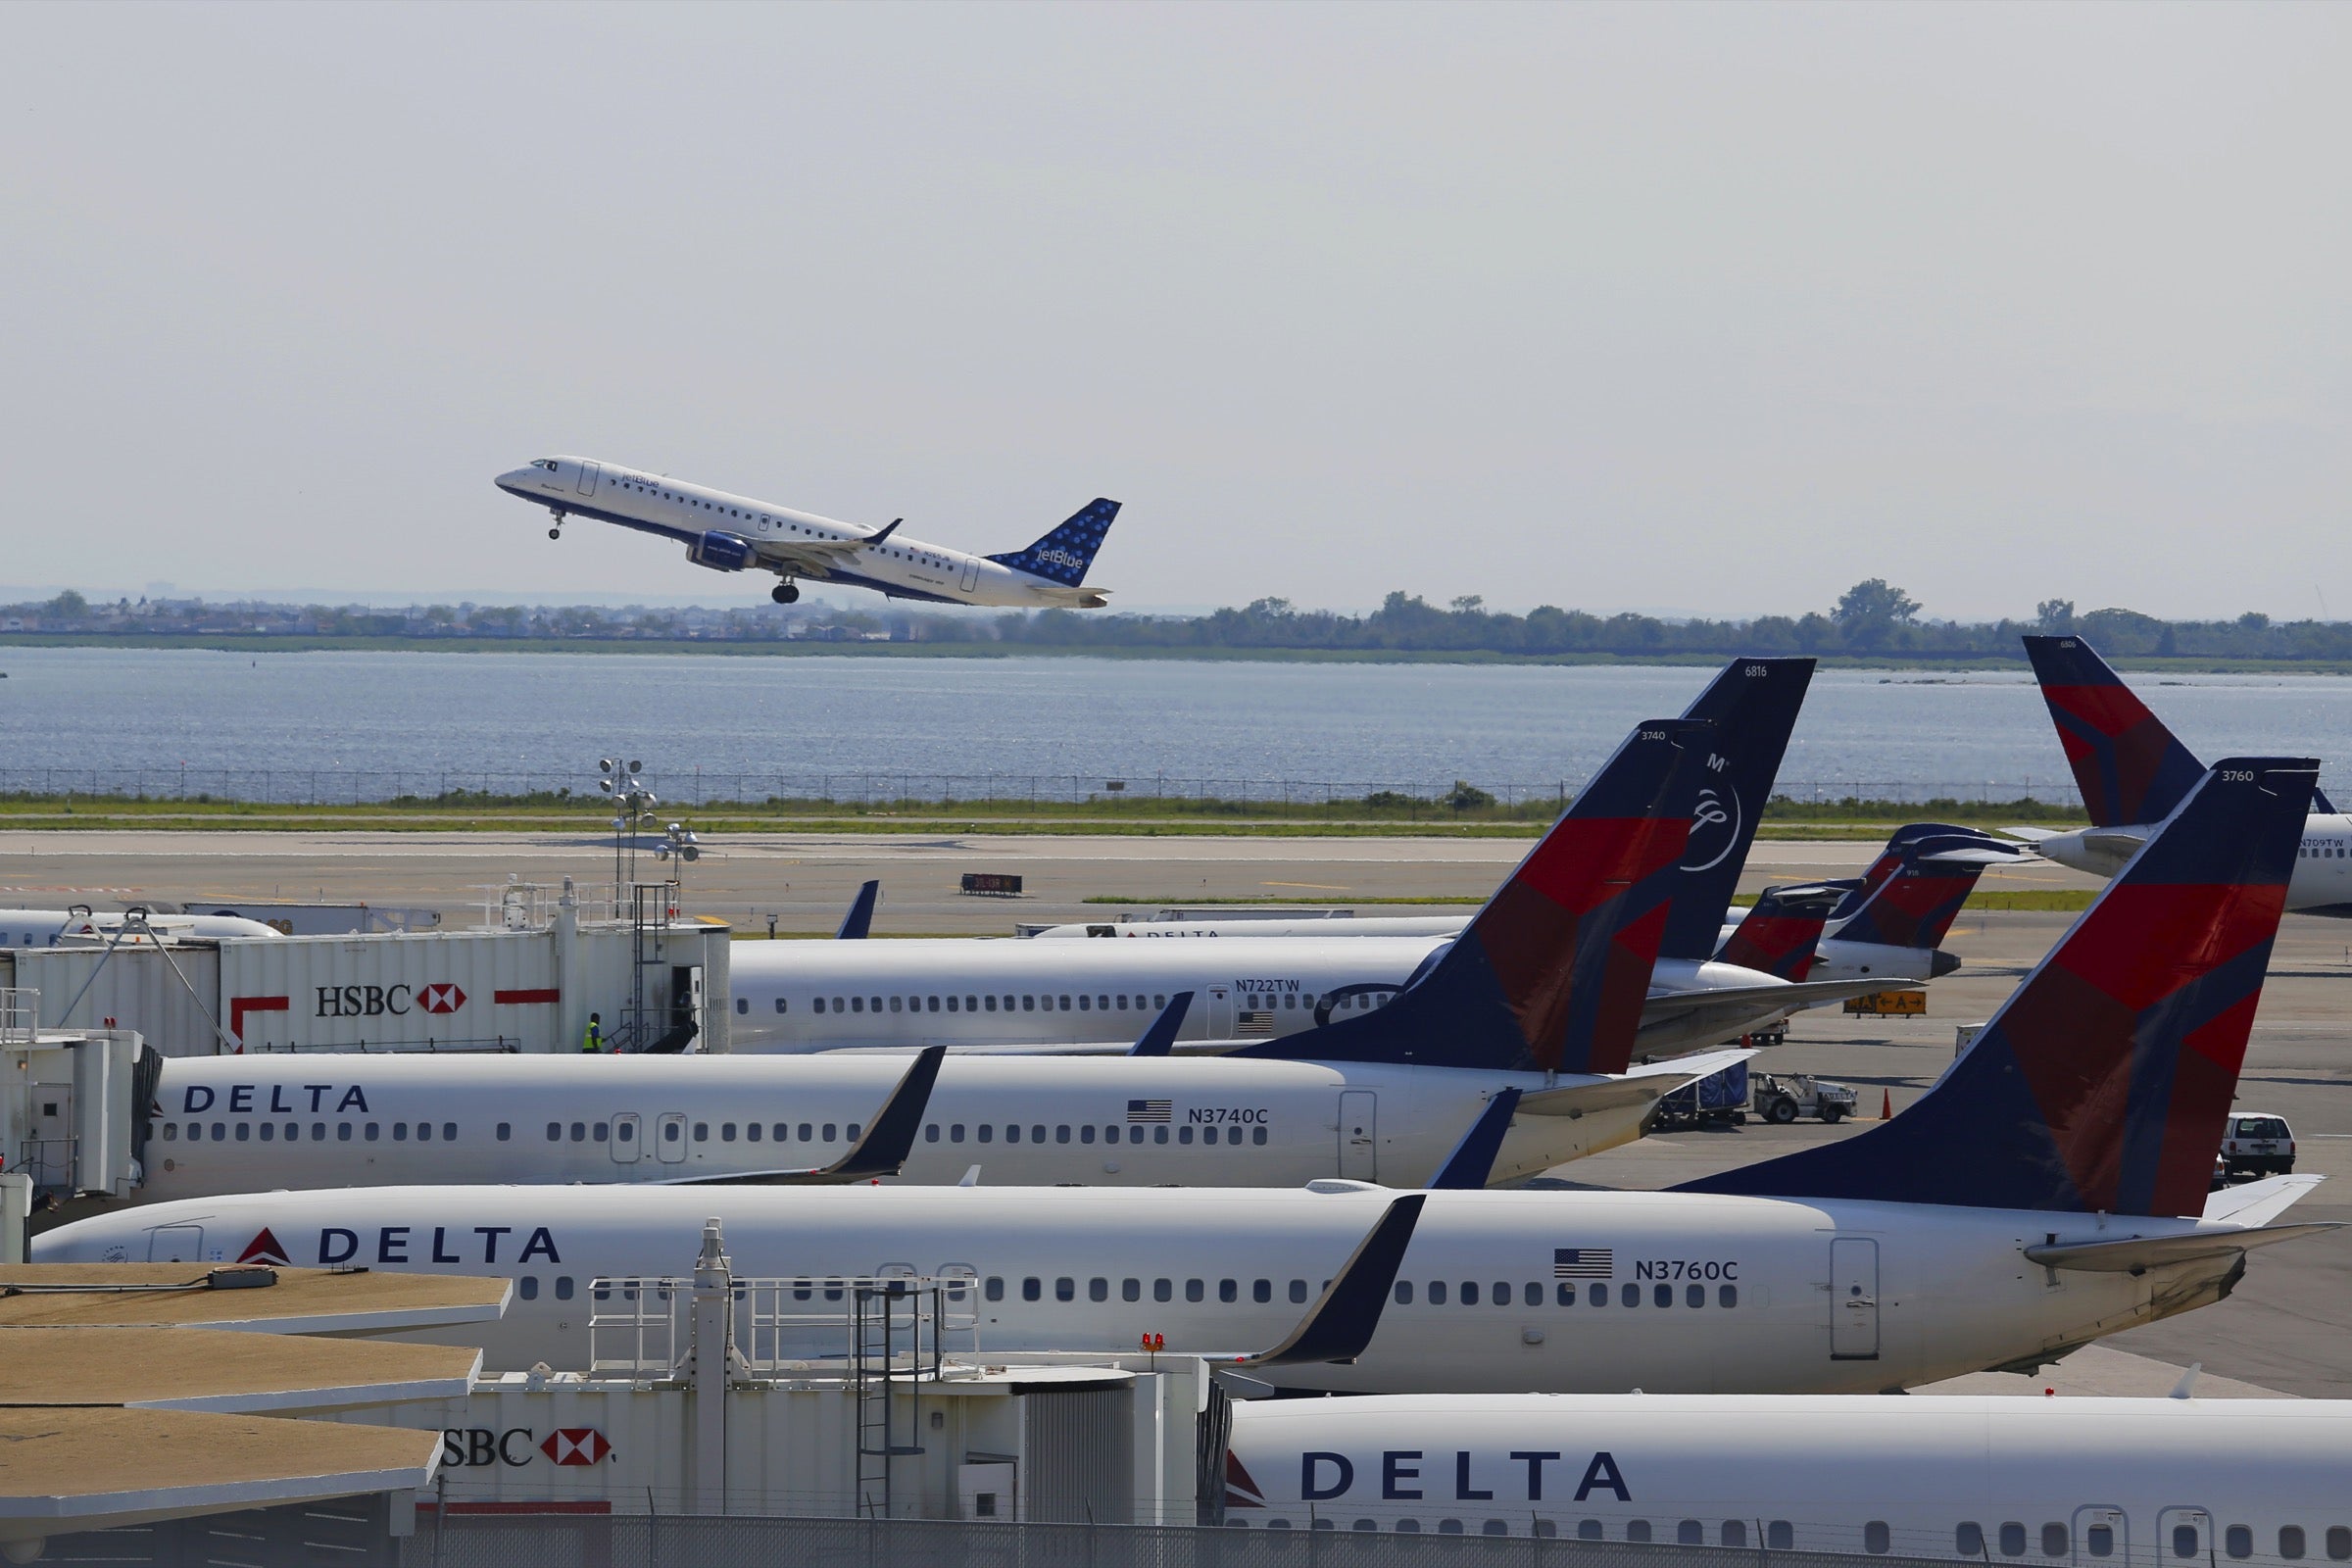 JetBlue plane taking off next to parked Delta planes at JFK